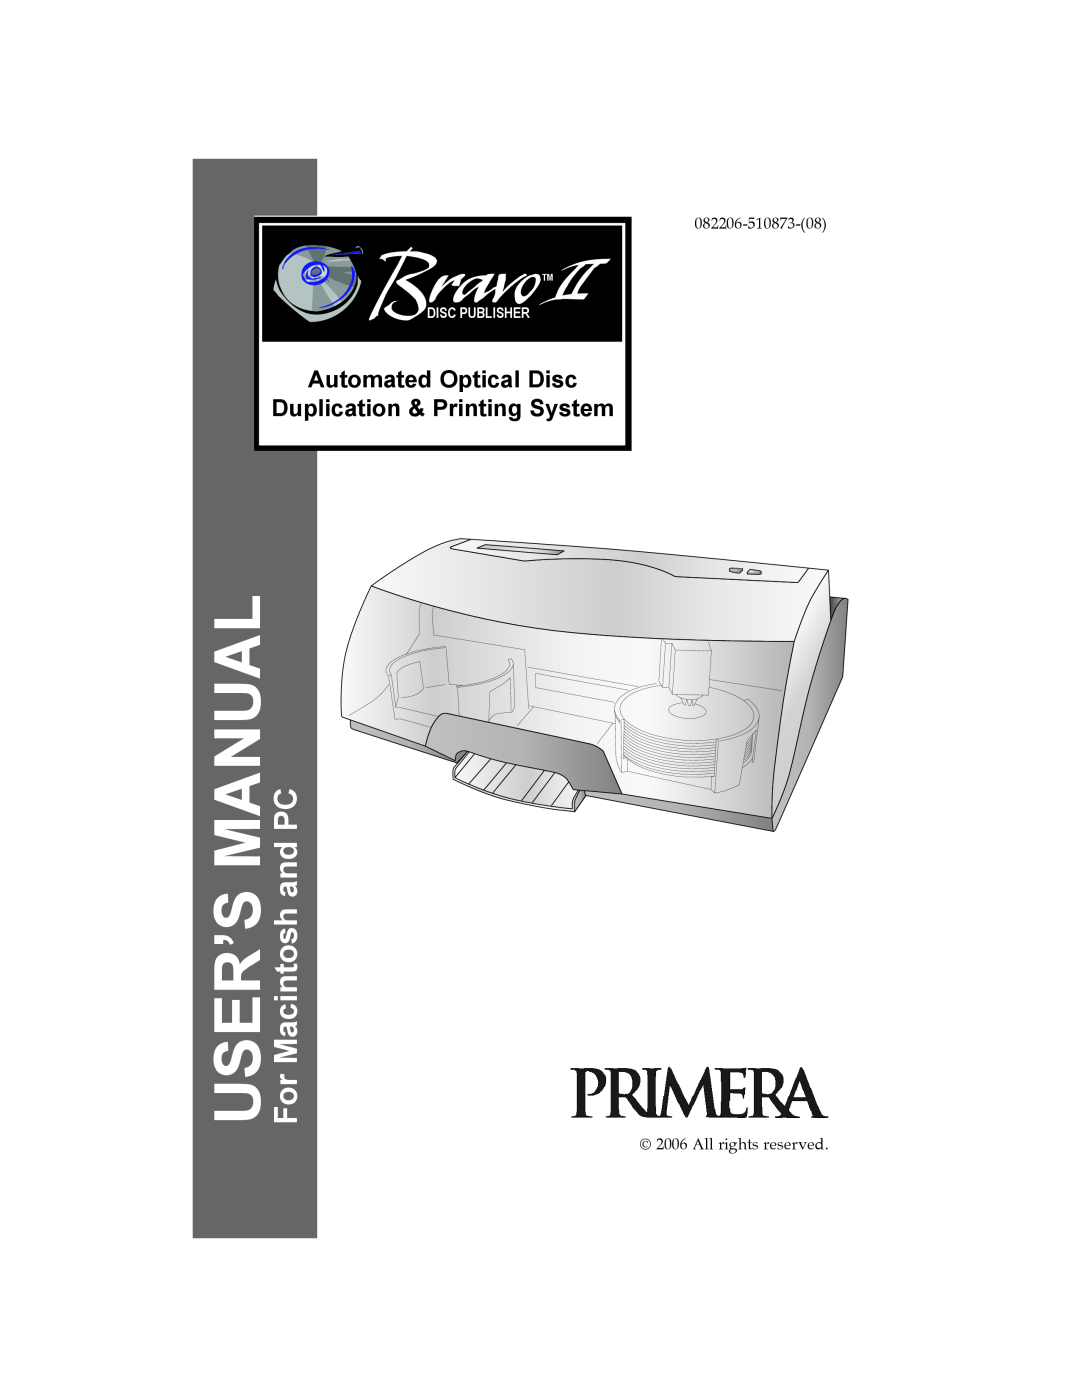 Primera Technology II user manual For Macintosh and PC, Auttomated Optical Disc, Duplication & Printing System 